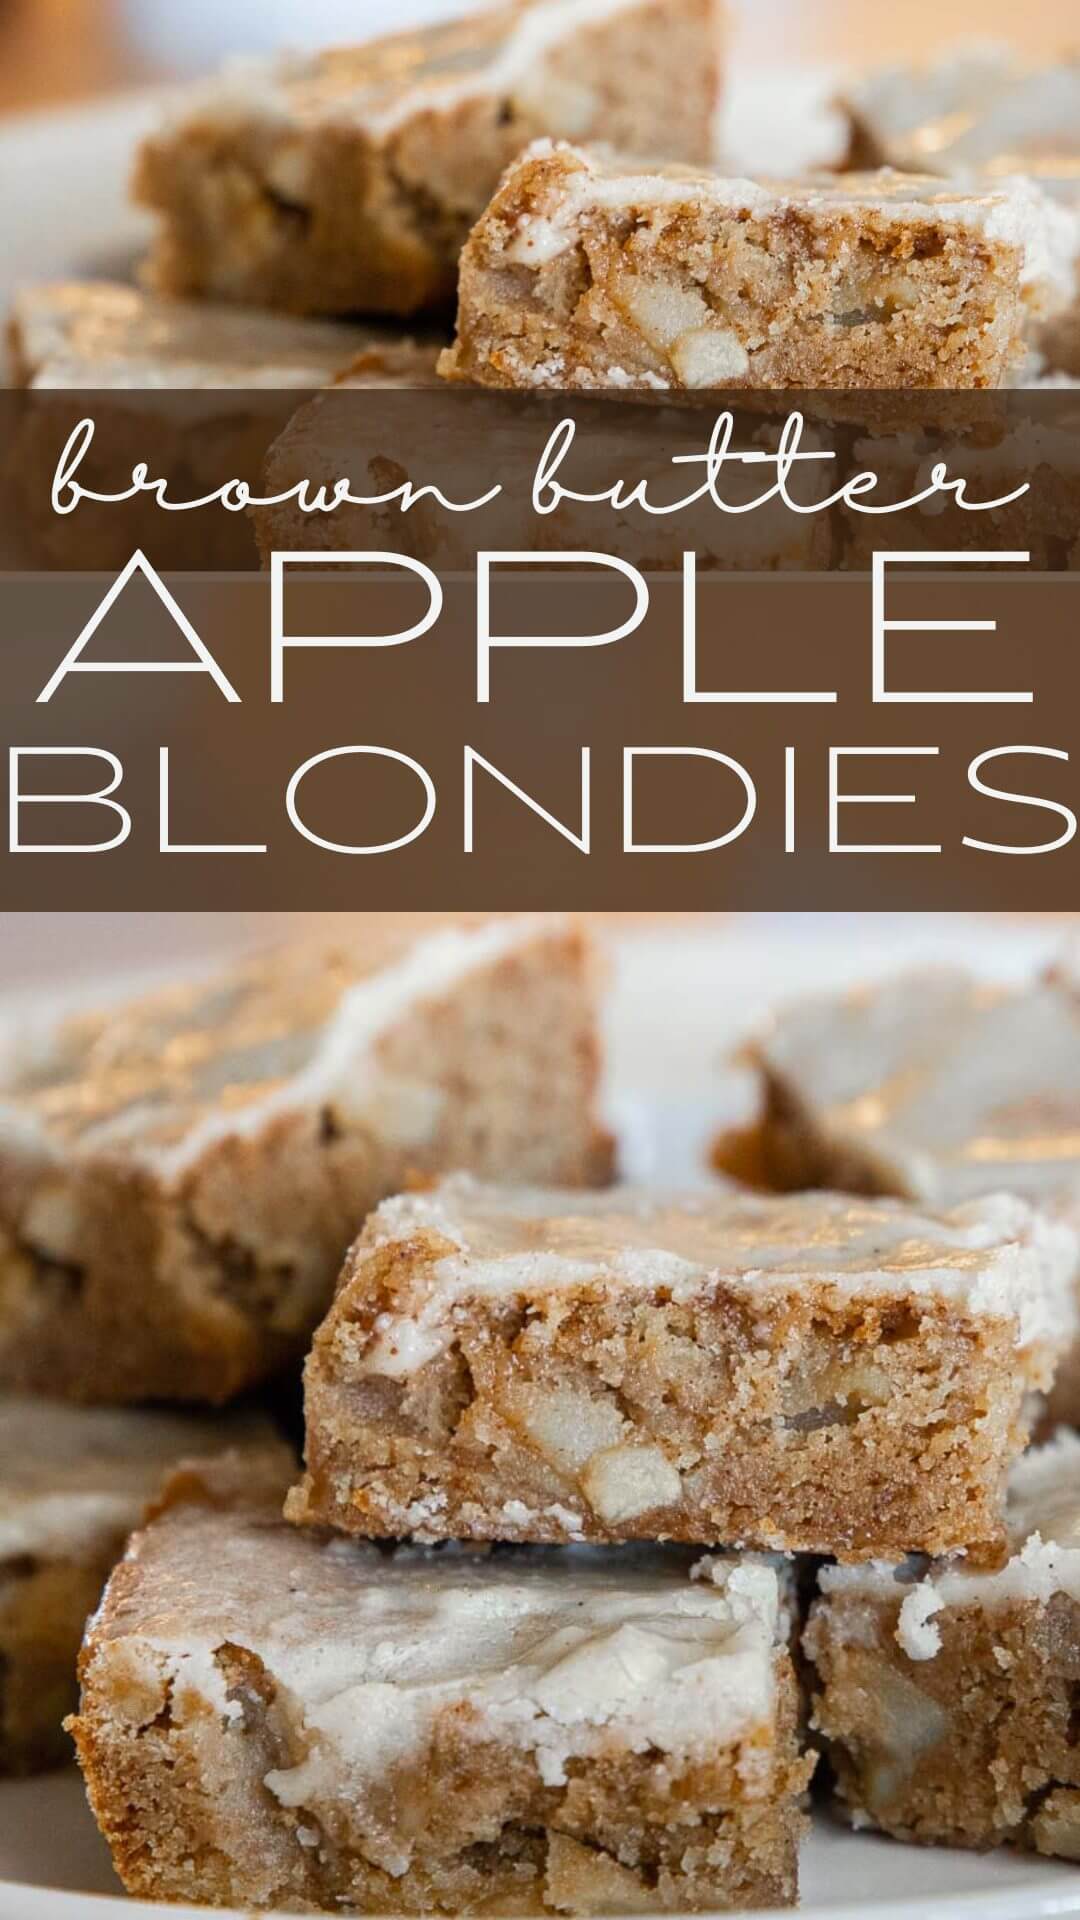 These brown butter apple blondies are an incredible treat you need to try. They are nutty and have a caramel/toffee flavor with tender apples.